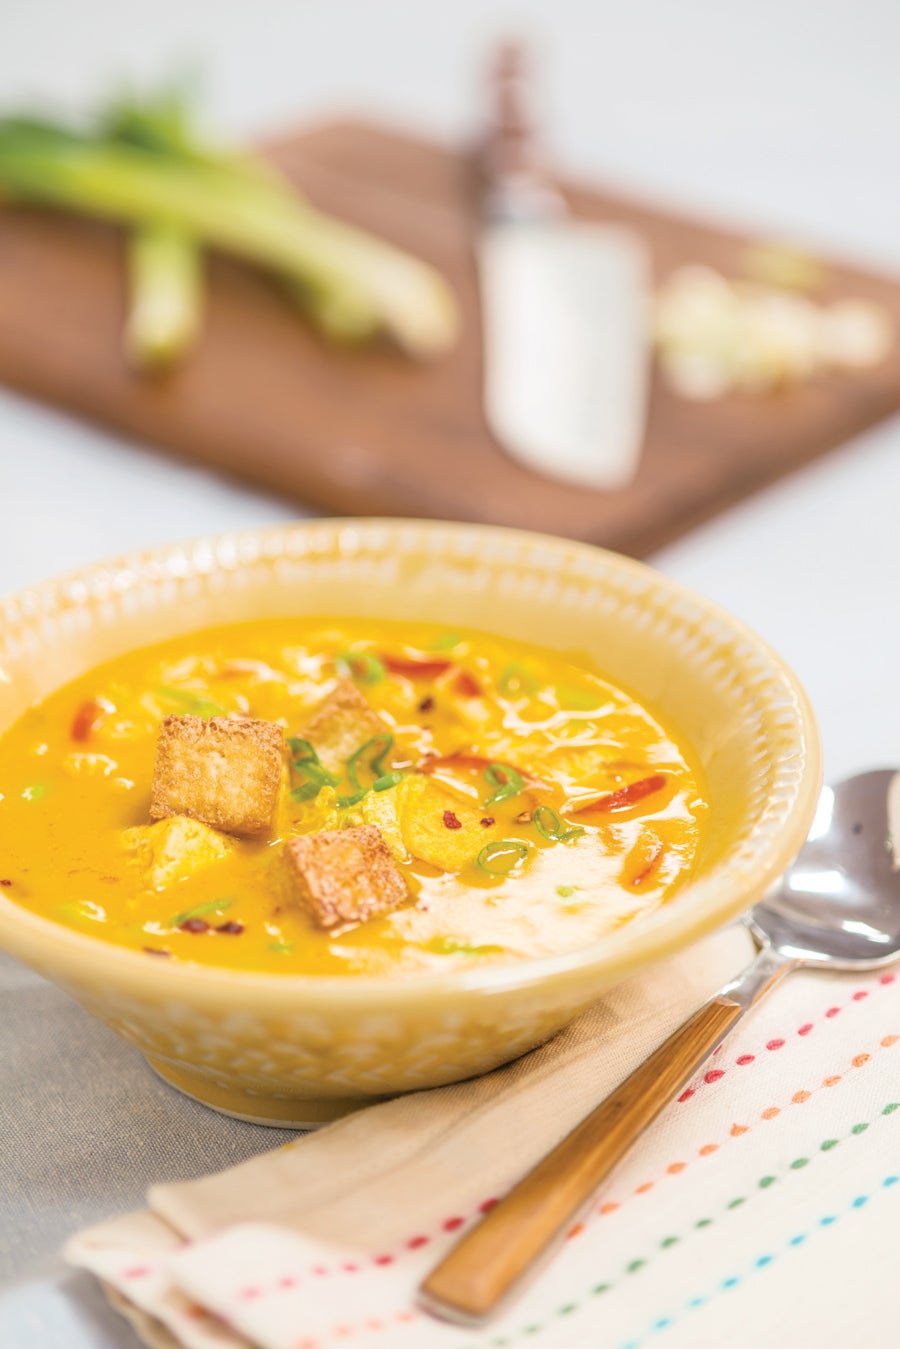 Gingered Carrot and Edamame Soup